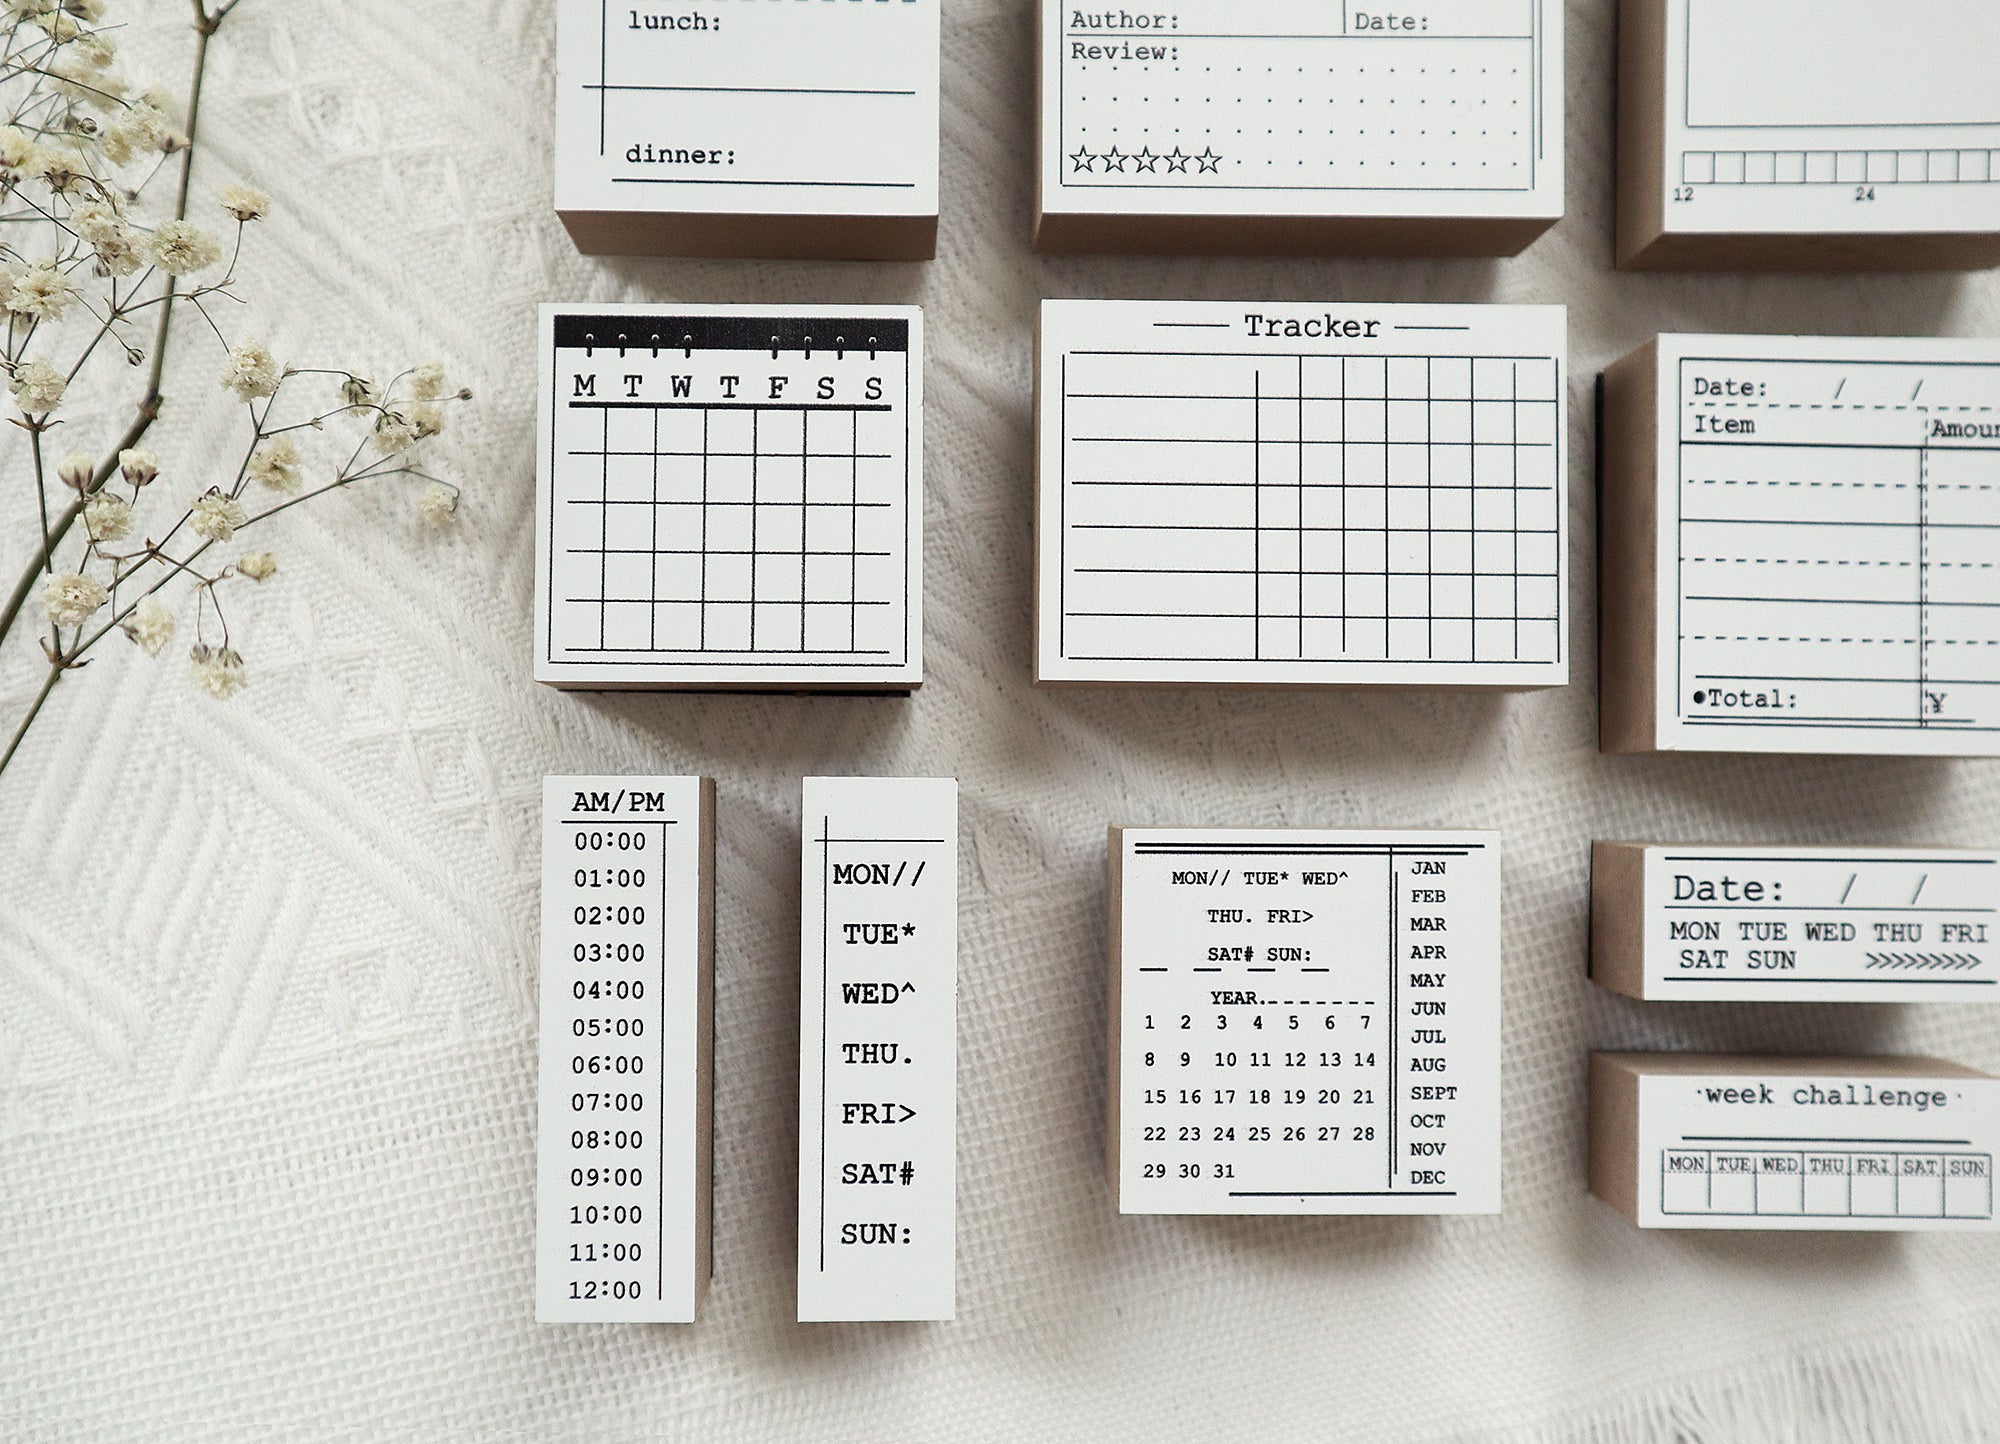 7ULY Rubber Stamp: Calendar – Papergame